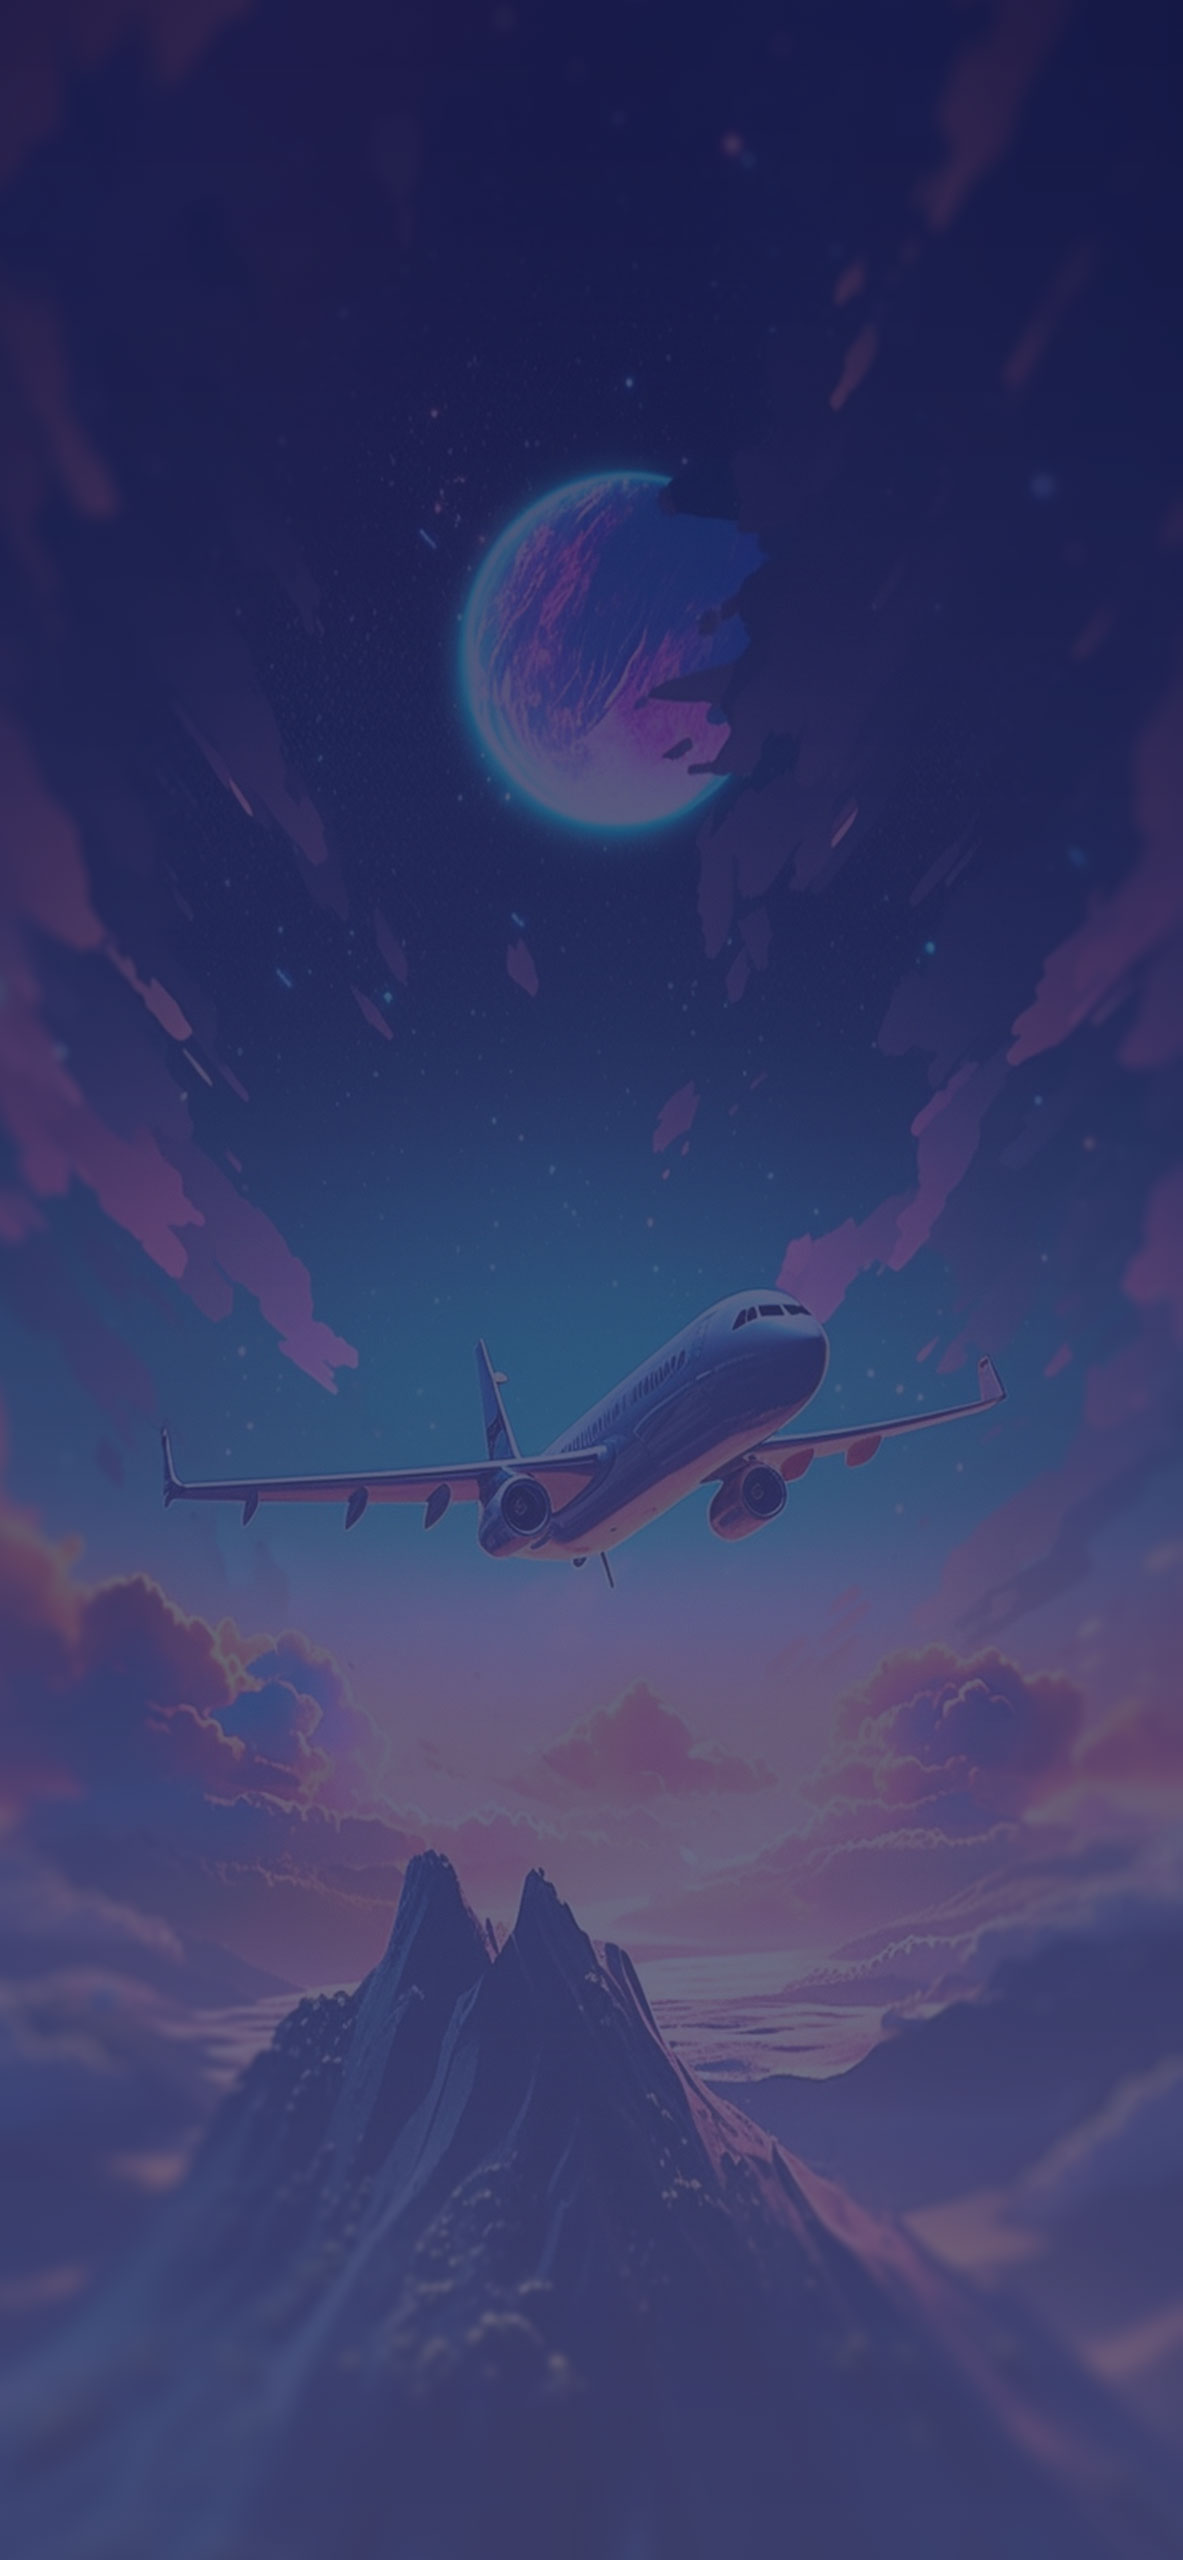 The plane flying above the mountains art wallpaper The flying